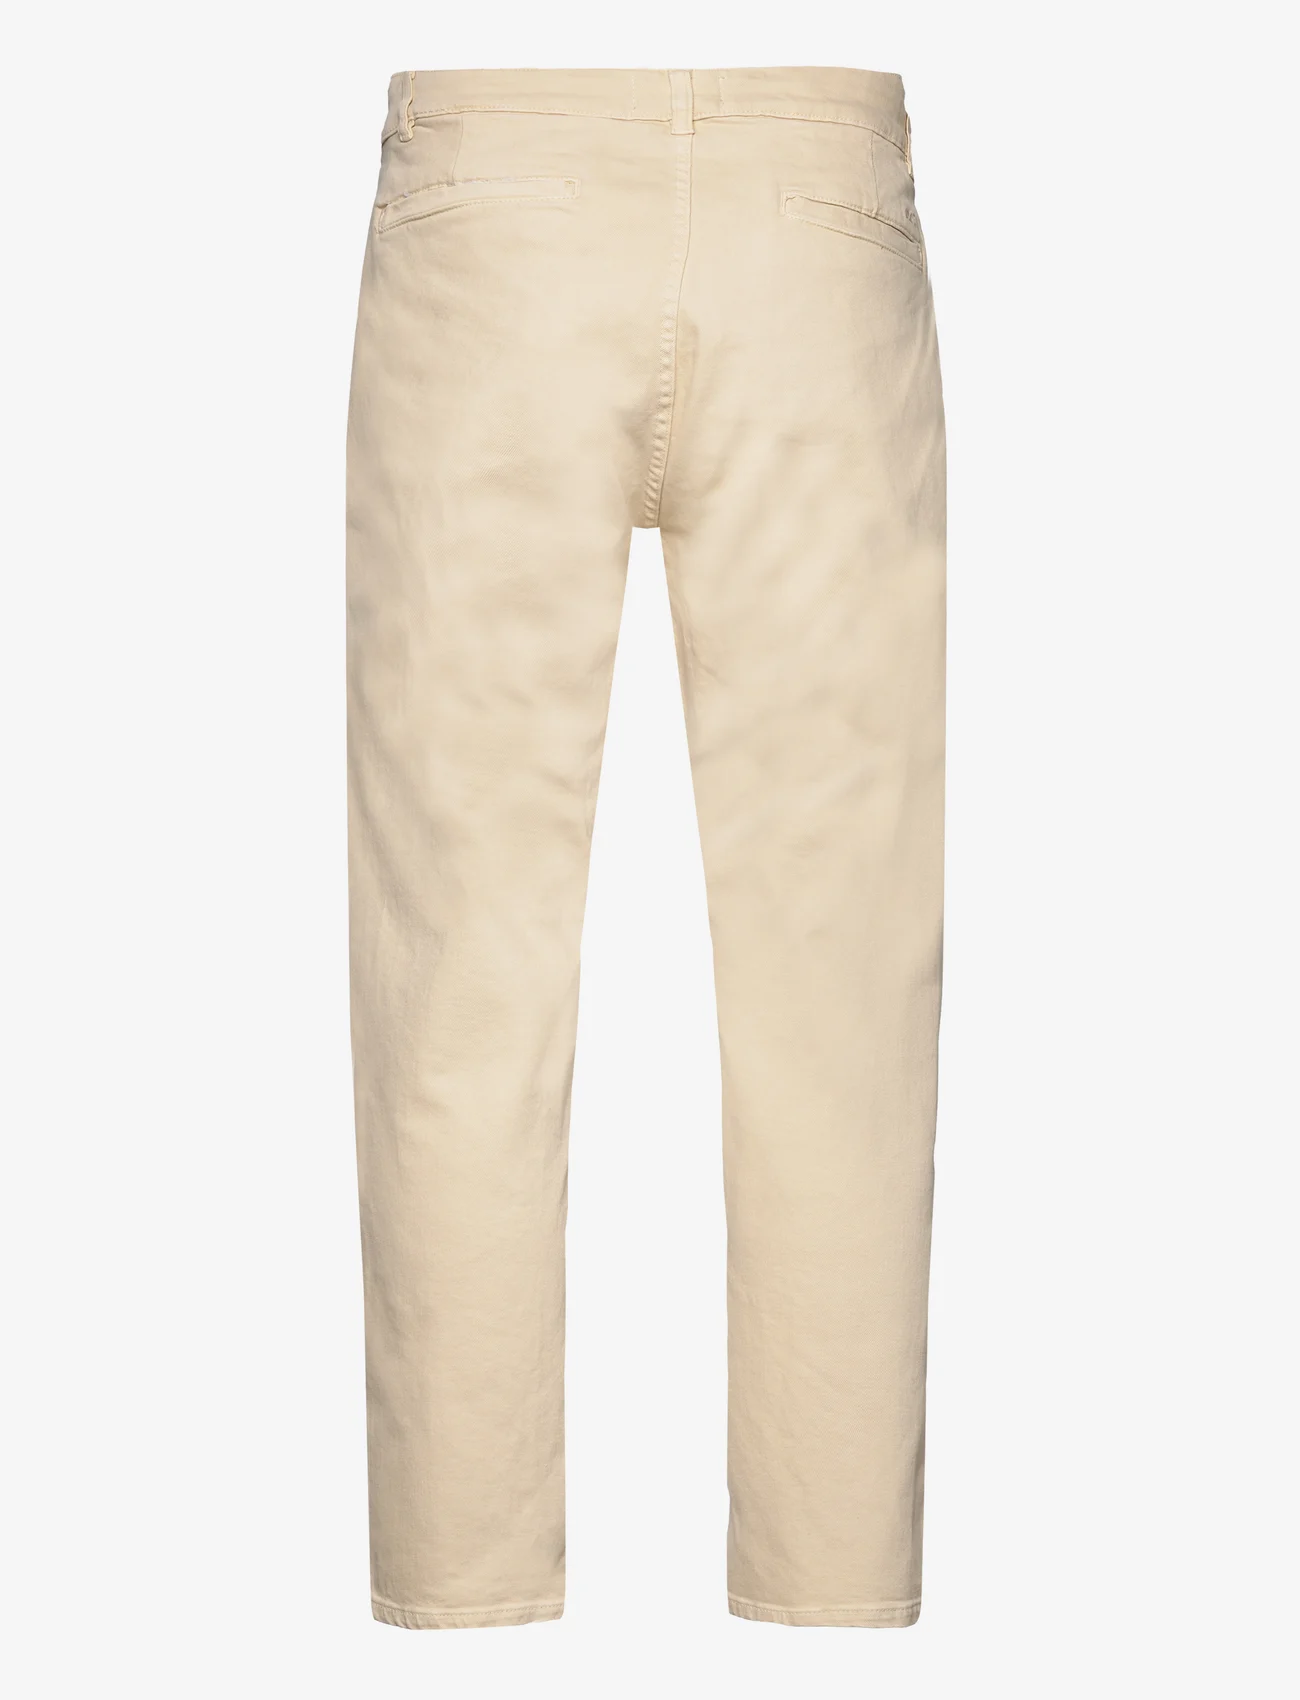 Denim project - DPChino Recycled Pants - chino's - bleached sand - 1